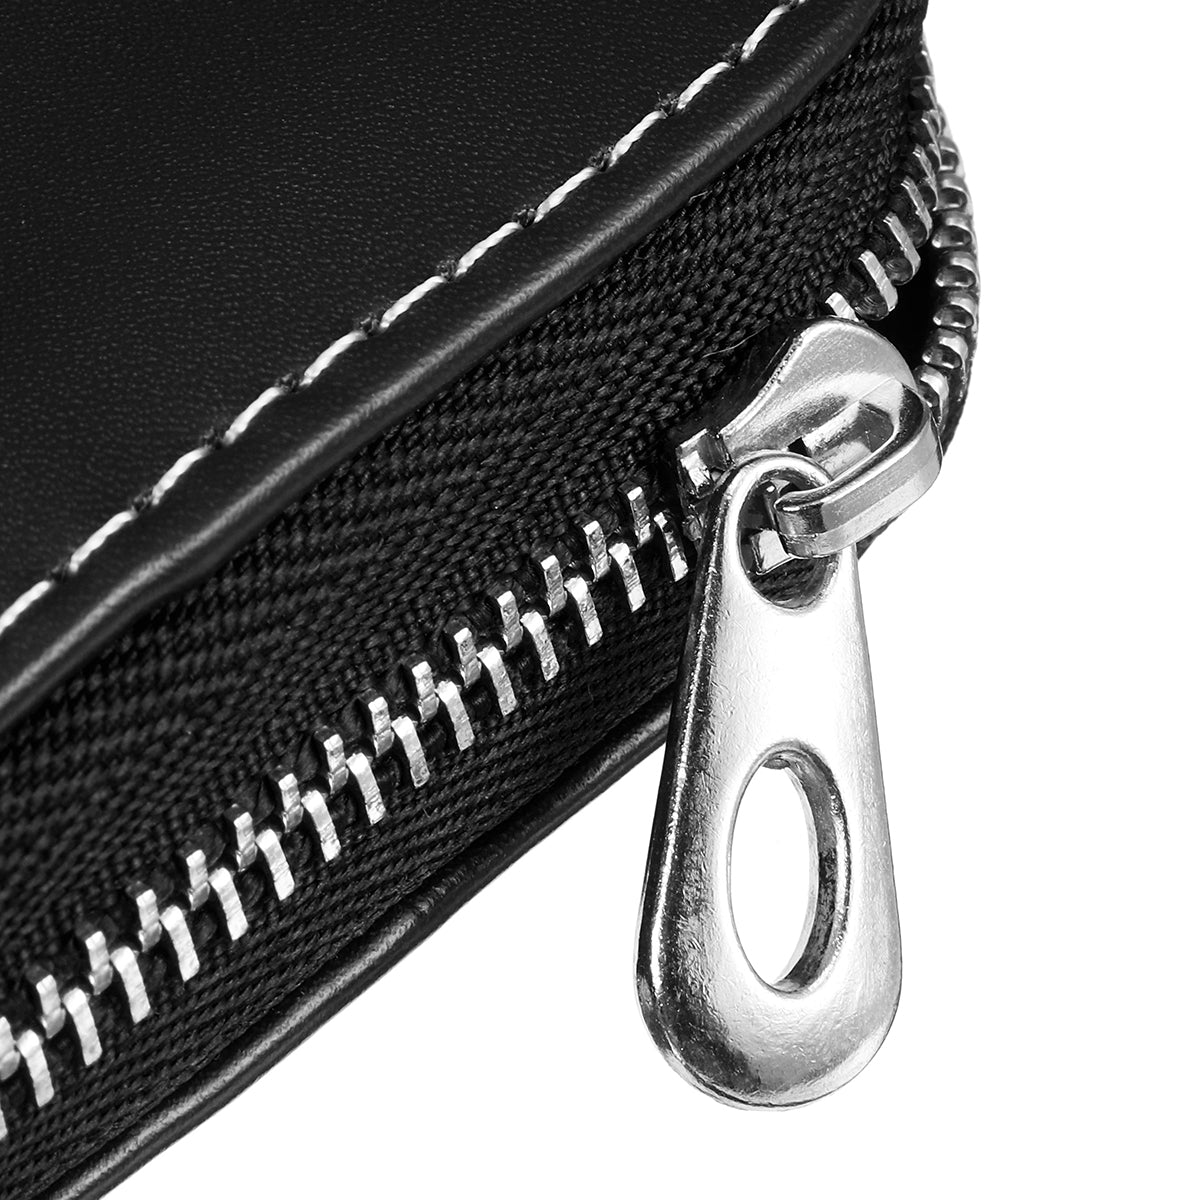 Black Universal Genuine Leather Car Key Case/Bag Zipper Holder Organizer with Keychain Ring 4 Colors